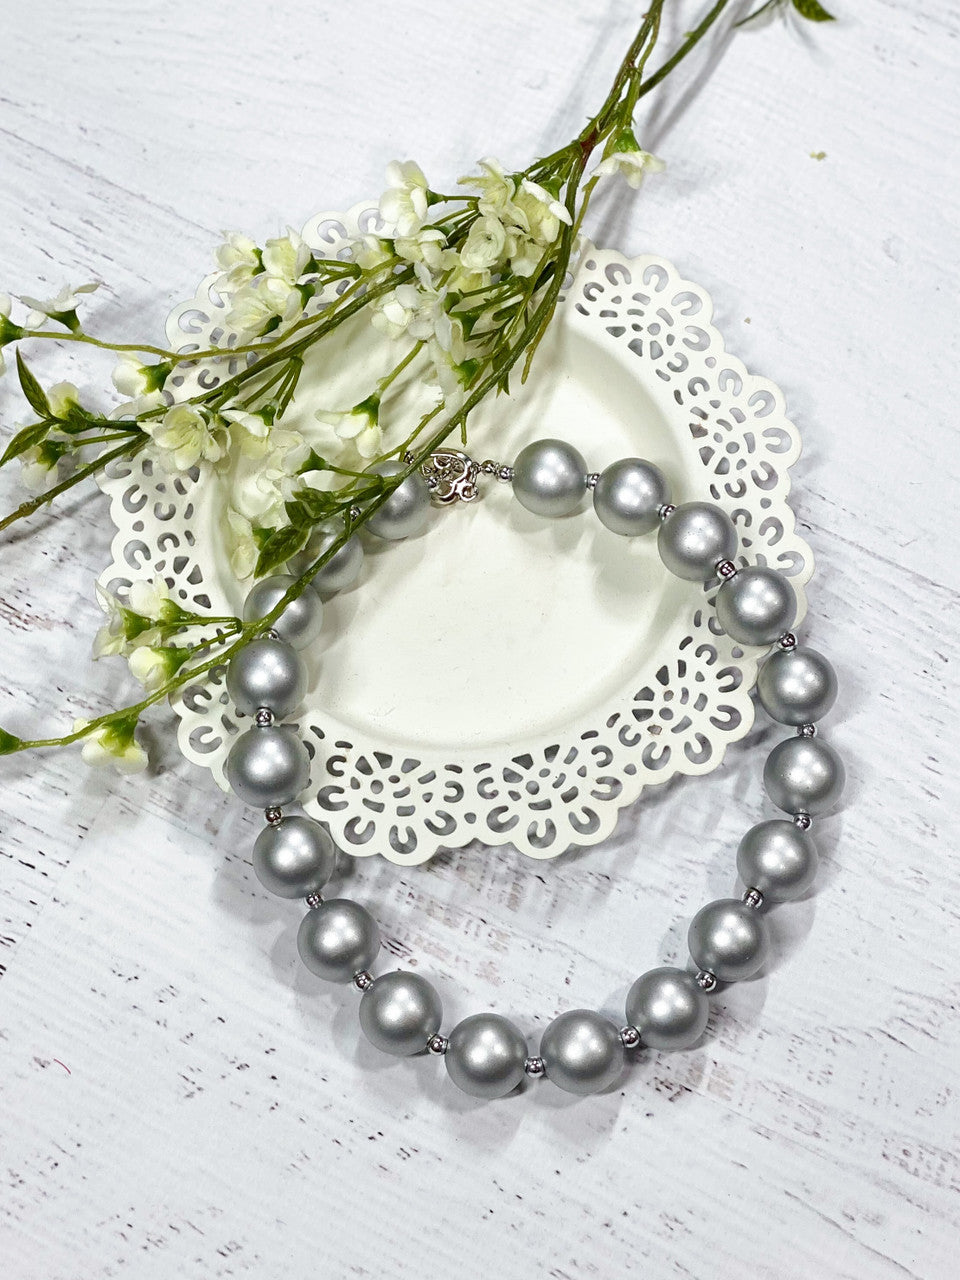 Silver chunky bead necklace, approximately 17"